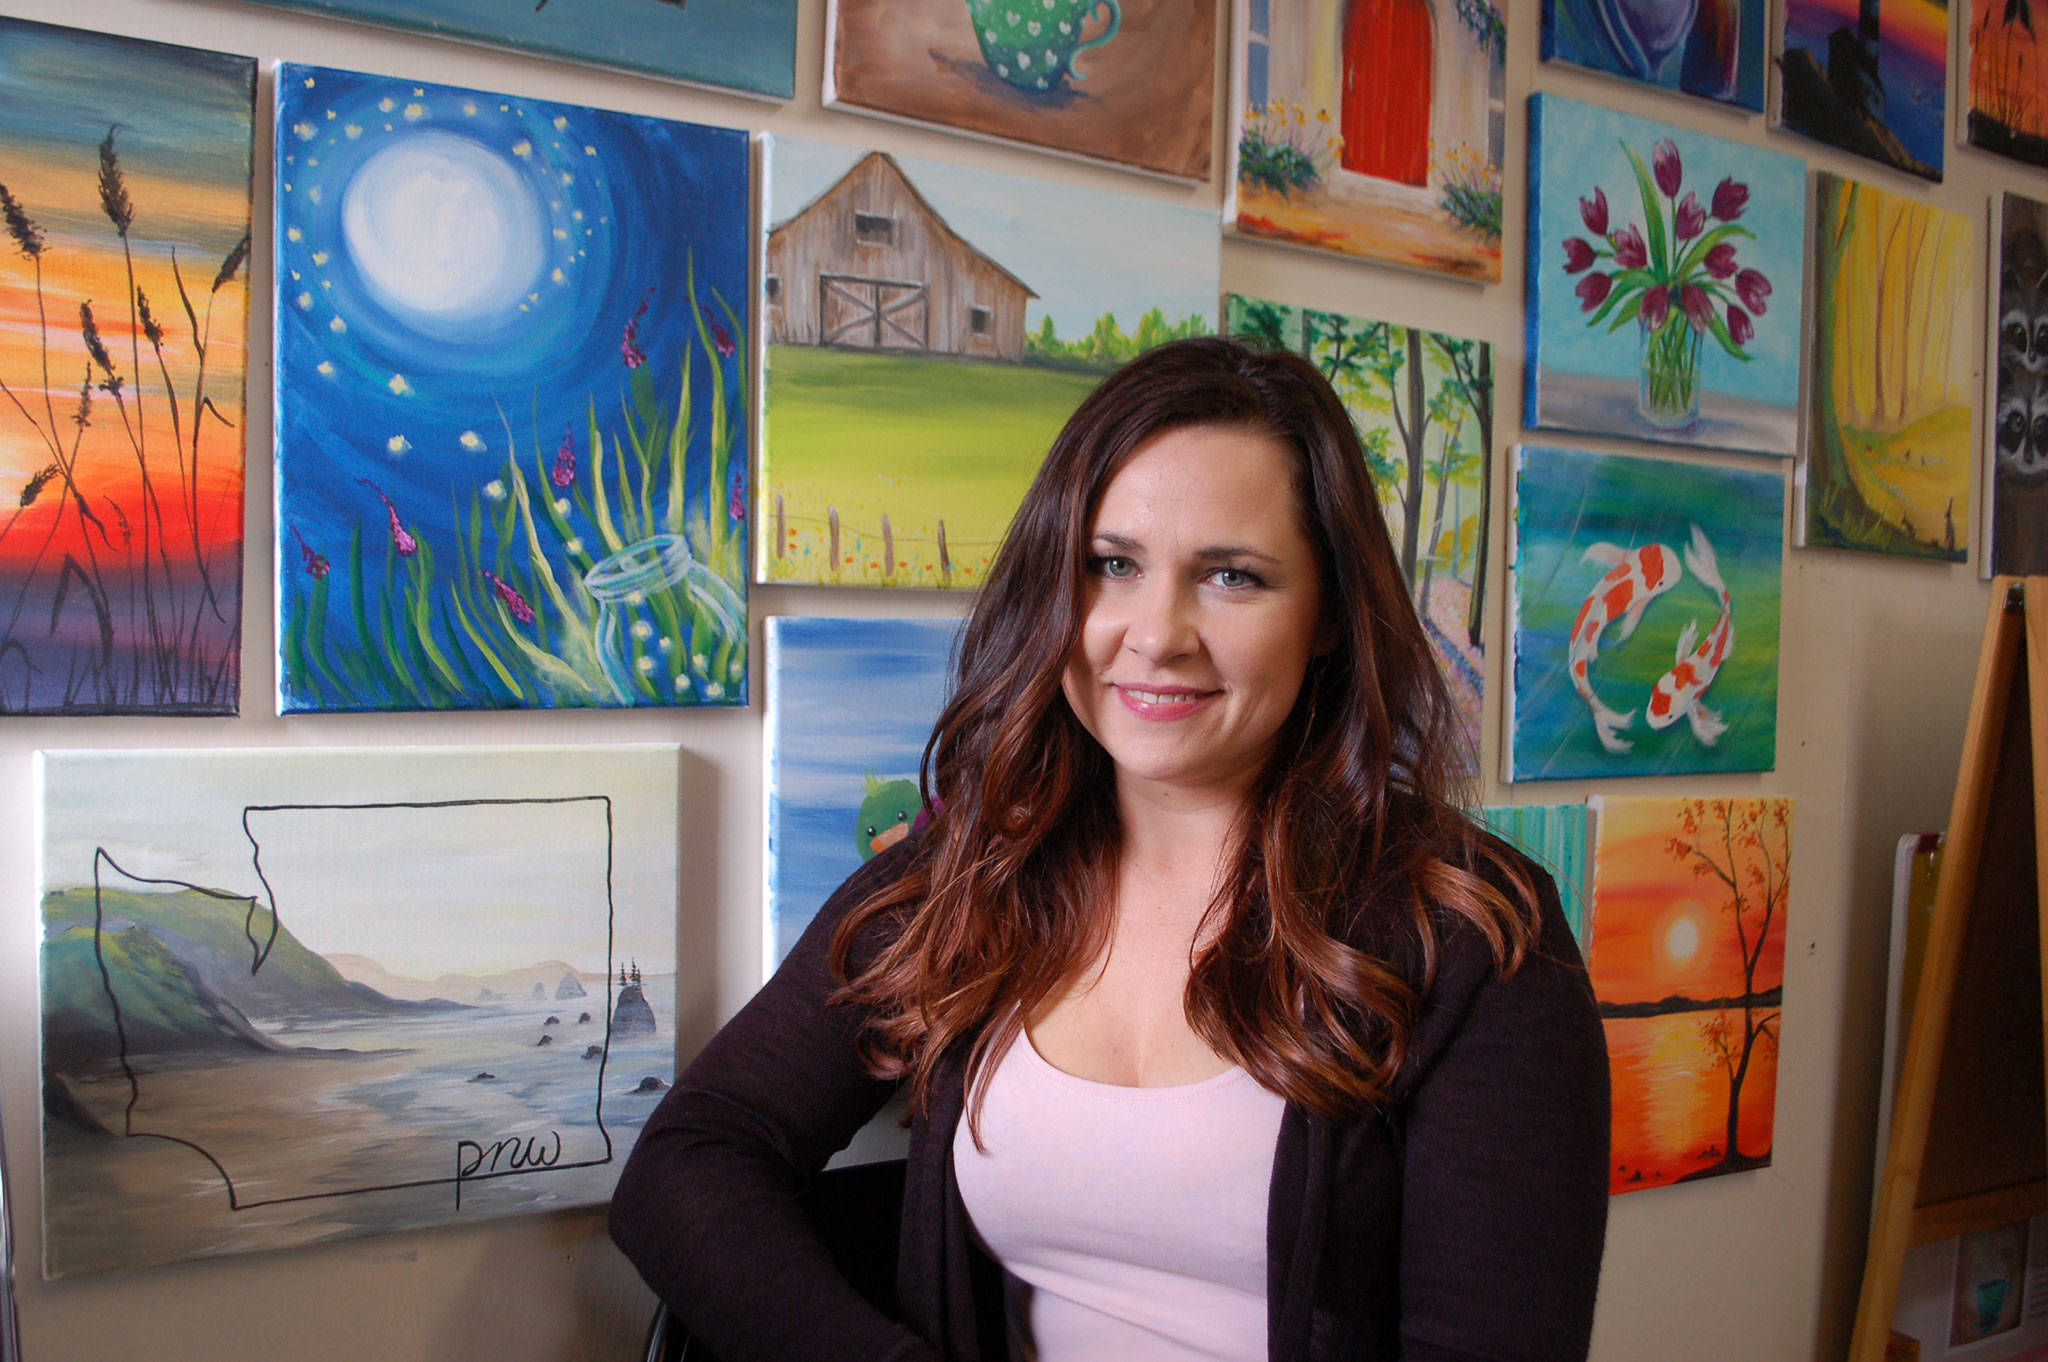 Sequim artist Natalie Martin sits in her home art studio and discusses how she aims to create both art and community together. Sequim Gazette photo by Erin Hawkins